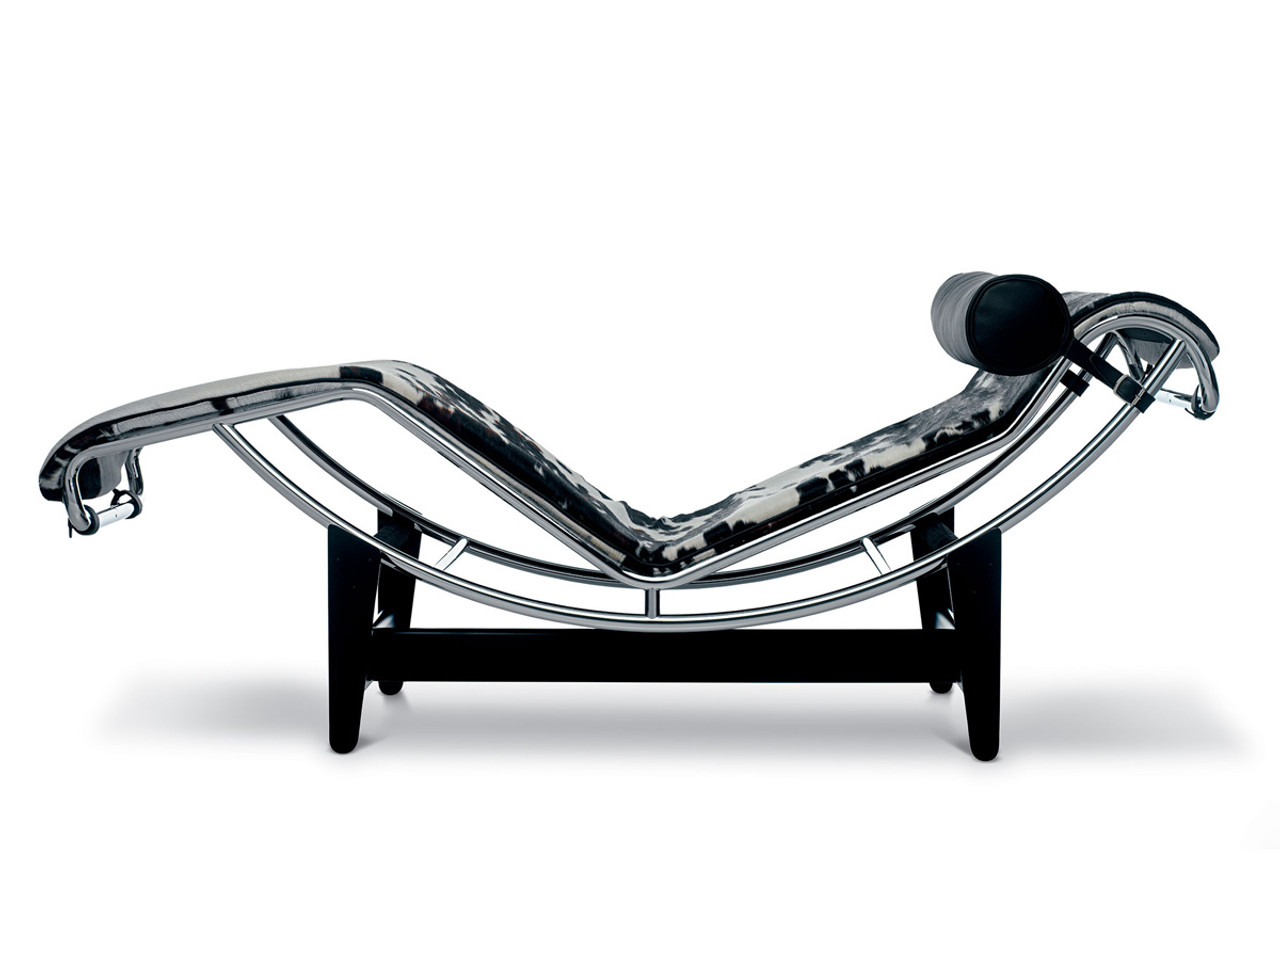  Cassina LC4 Chaise Lounge by Le Corbusier, Pierre Jeanneret, Charlotte Perriand